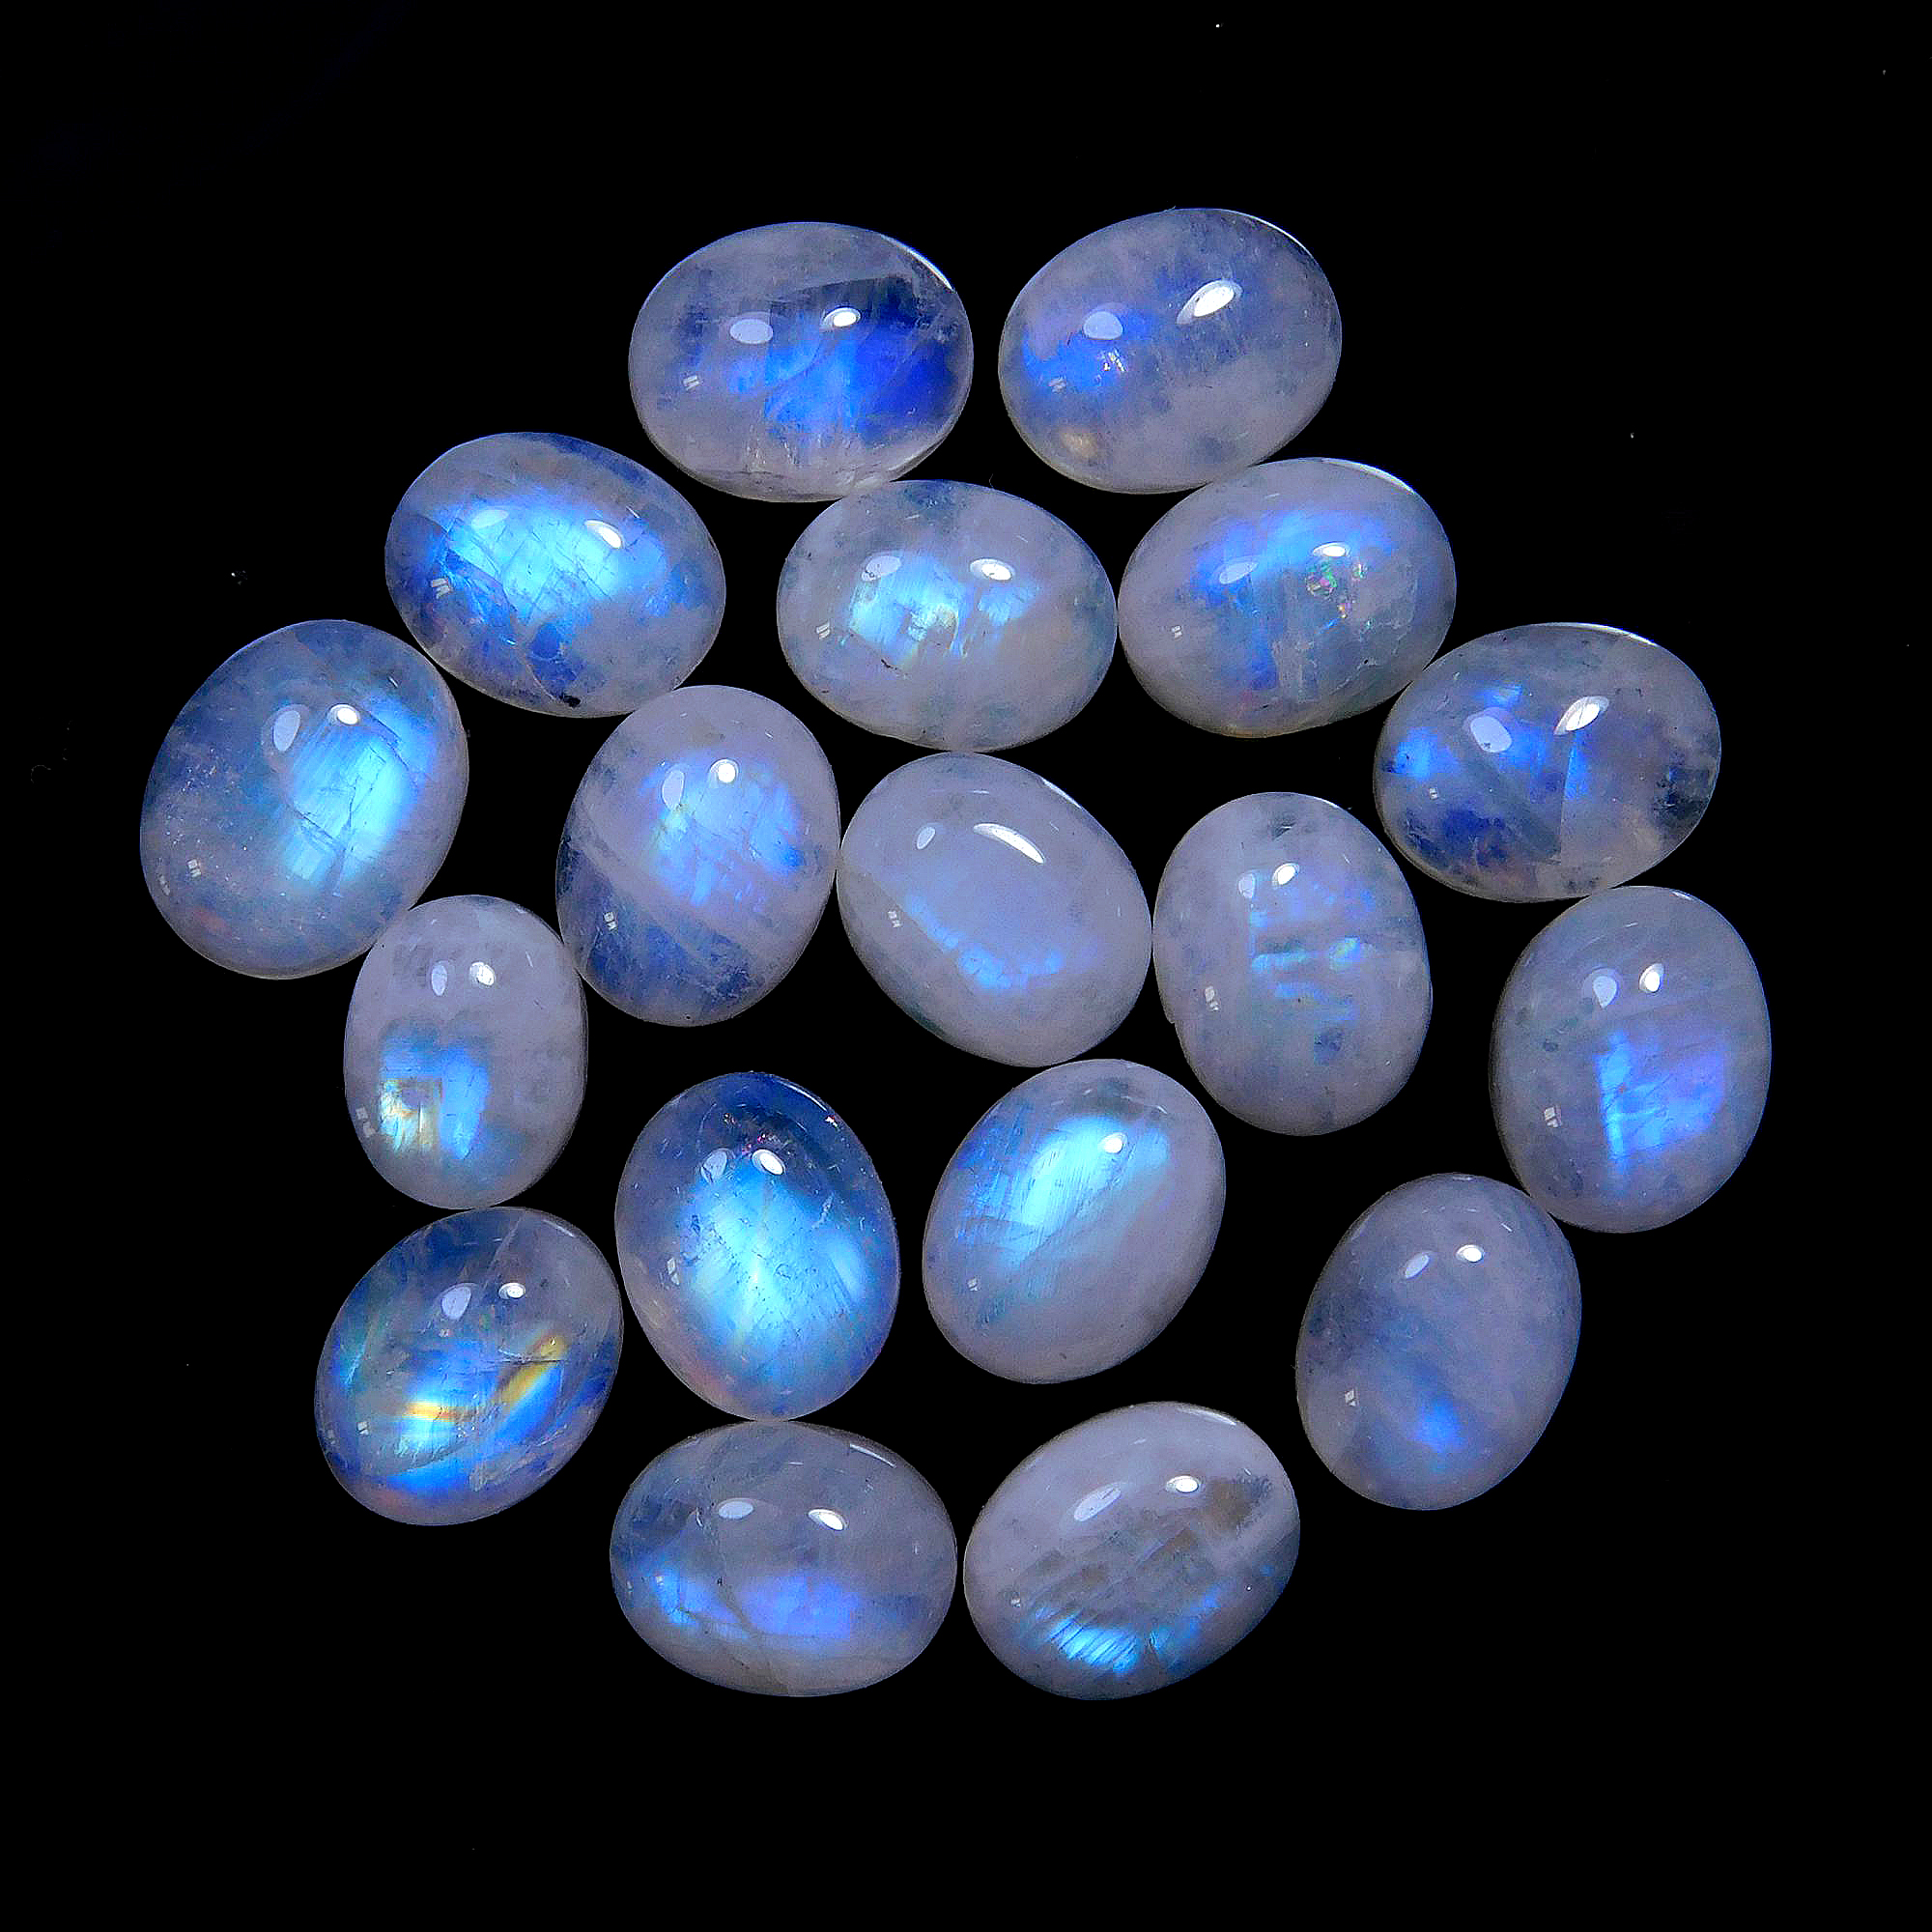 18 Pcs.62 Cts. Natural Rainbow Moonstone calibrated Oval Cabochon Loose Gemstone Wholesale Lot Size 10x8mm